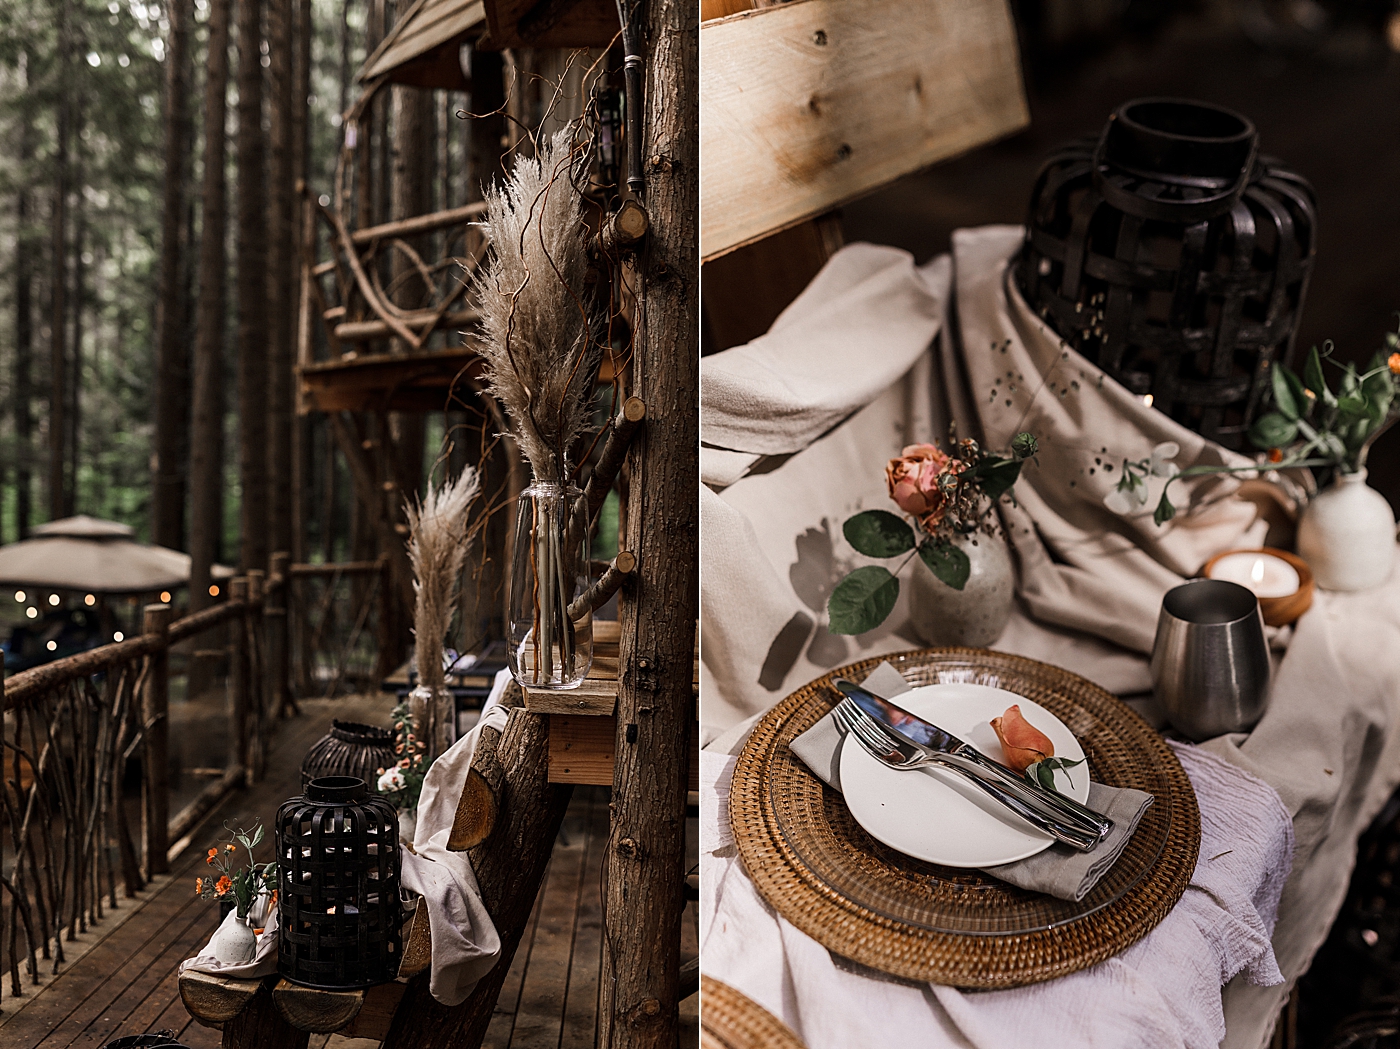 Intimate wedding details at The Emerald Forest | Megan Montalvo Photography